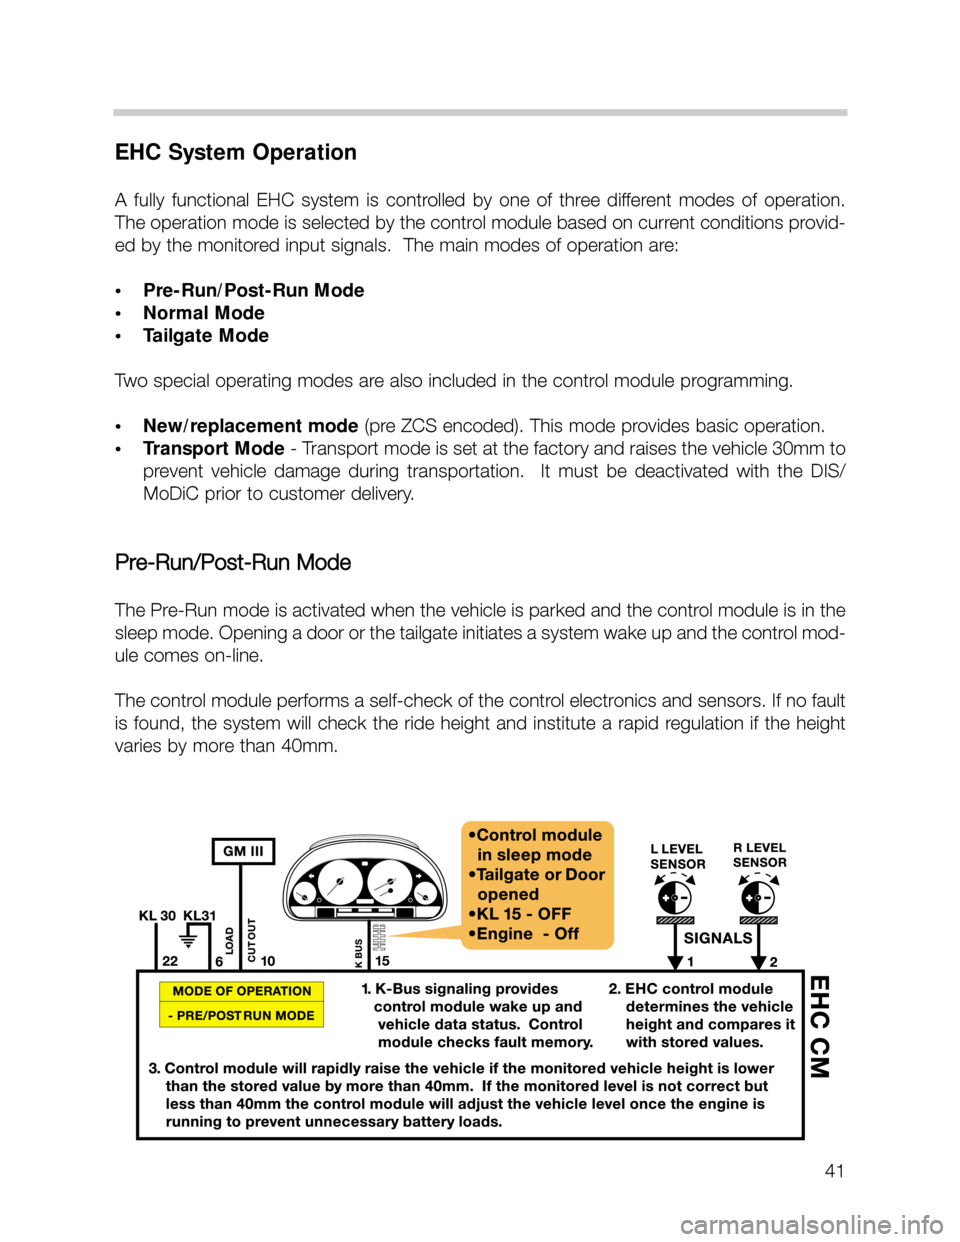 BMW X5 2000 E53 Workshop Manual 41
EHC System Operation
A  fully  functional  EHC  system  is  controlled  by  one  of  three  different  modes  of  operation.
The operation mode is selected by the control module based on current co